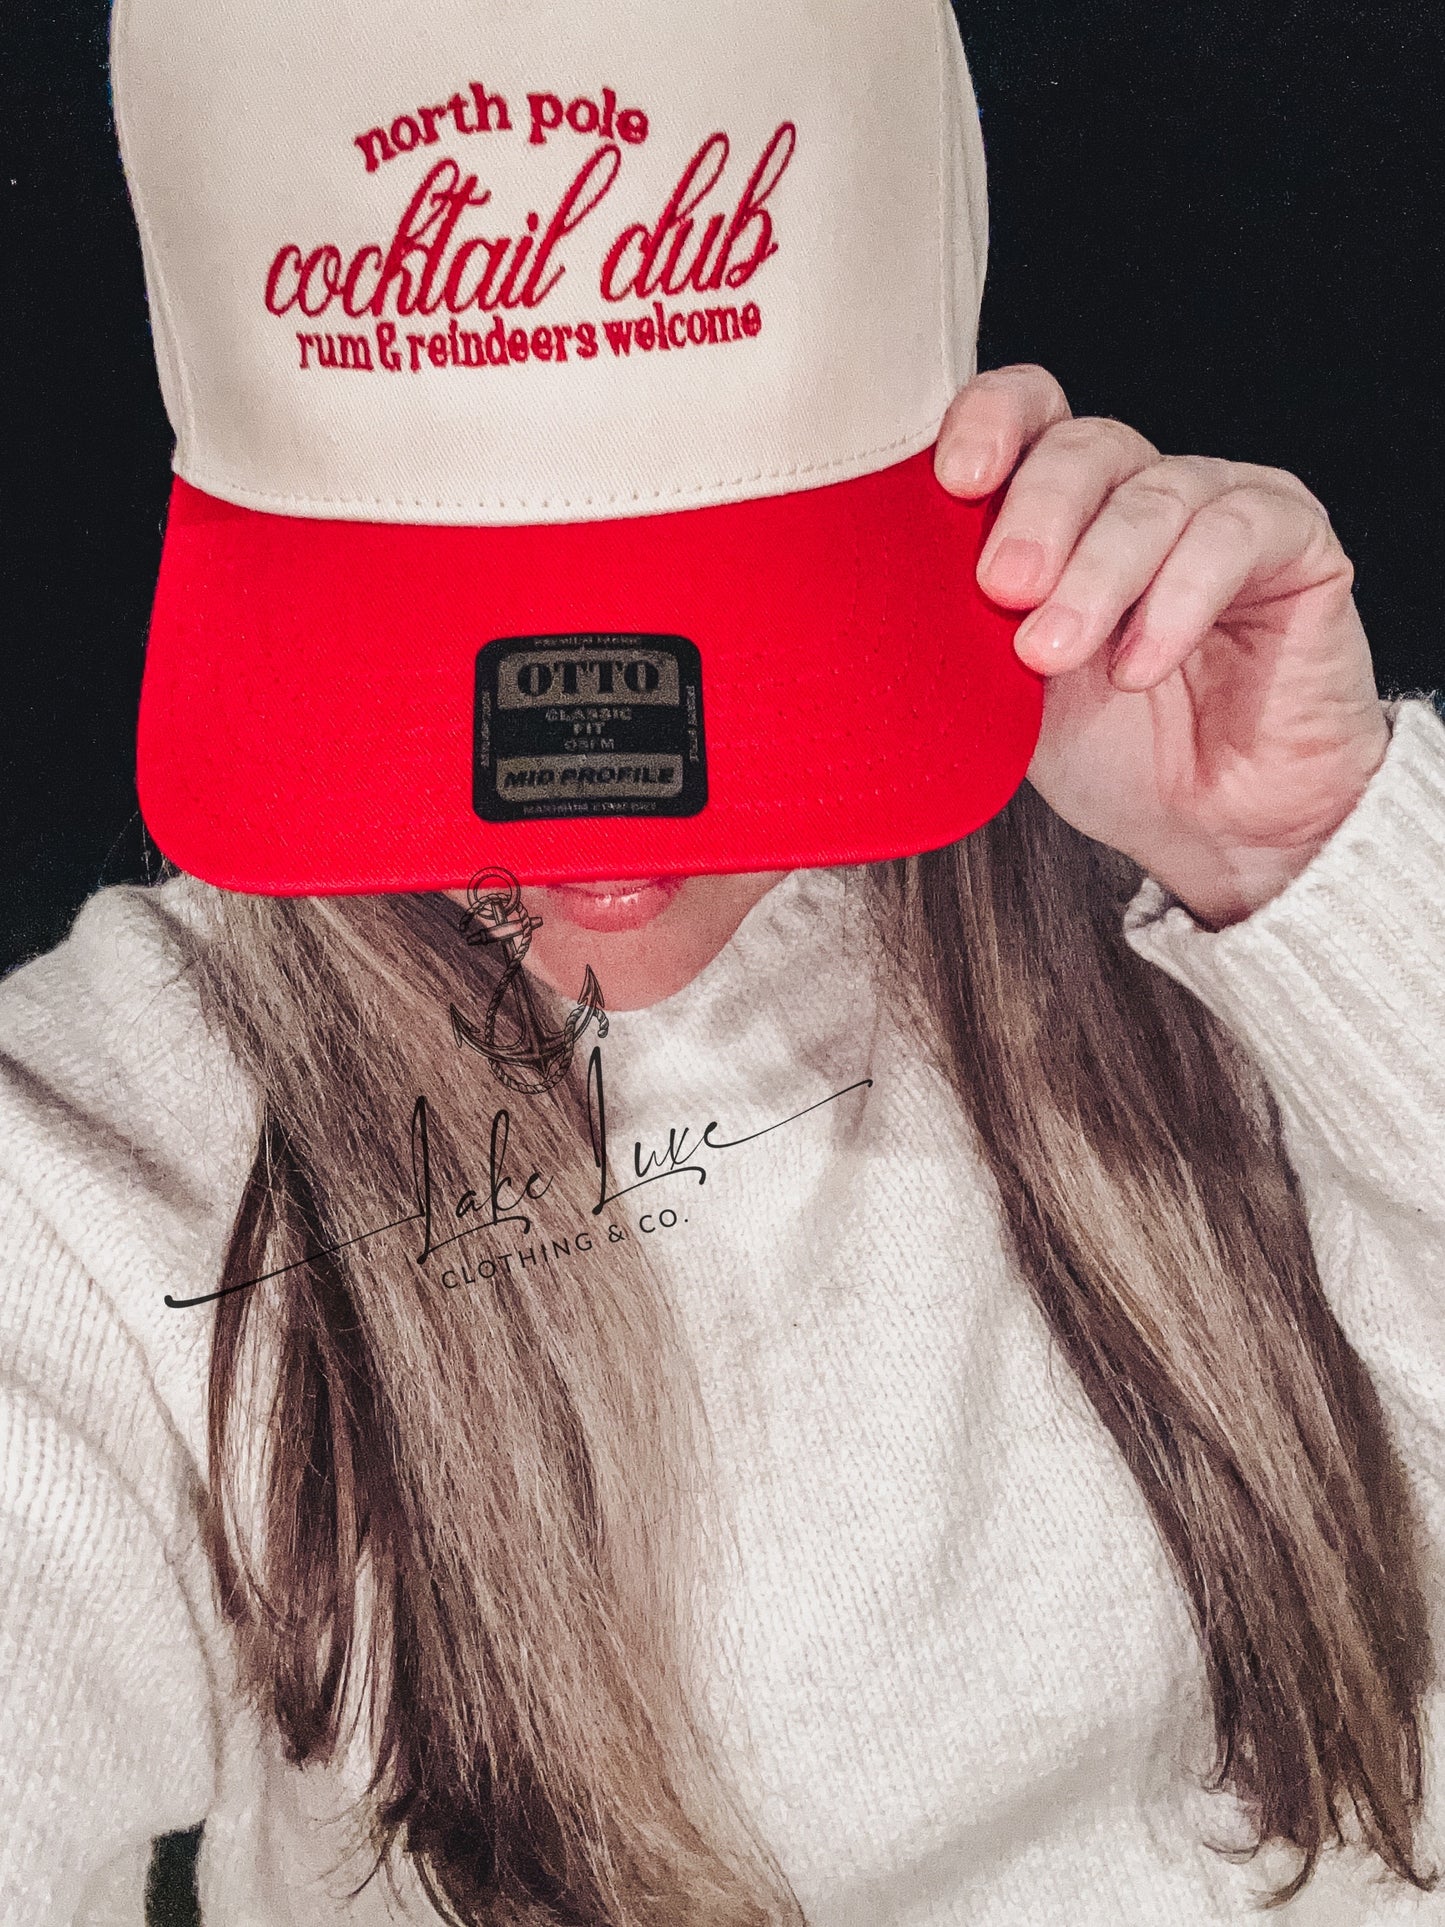 North Pole Cocktail Club hat